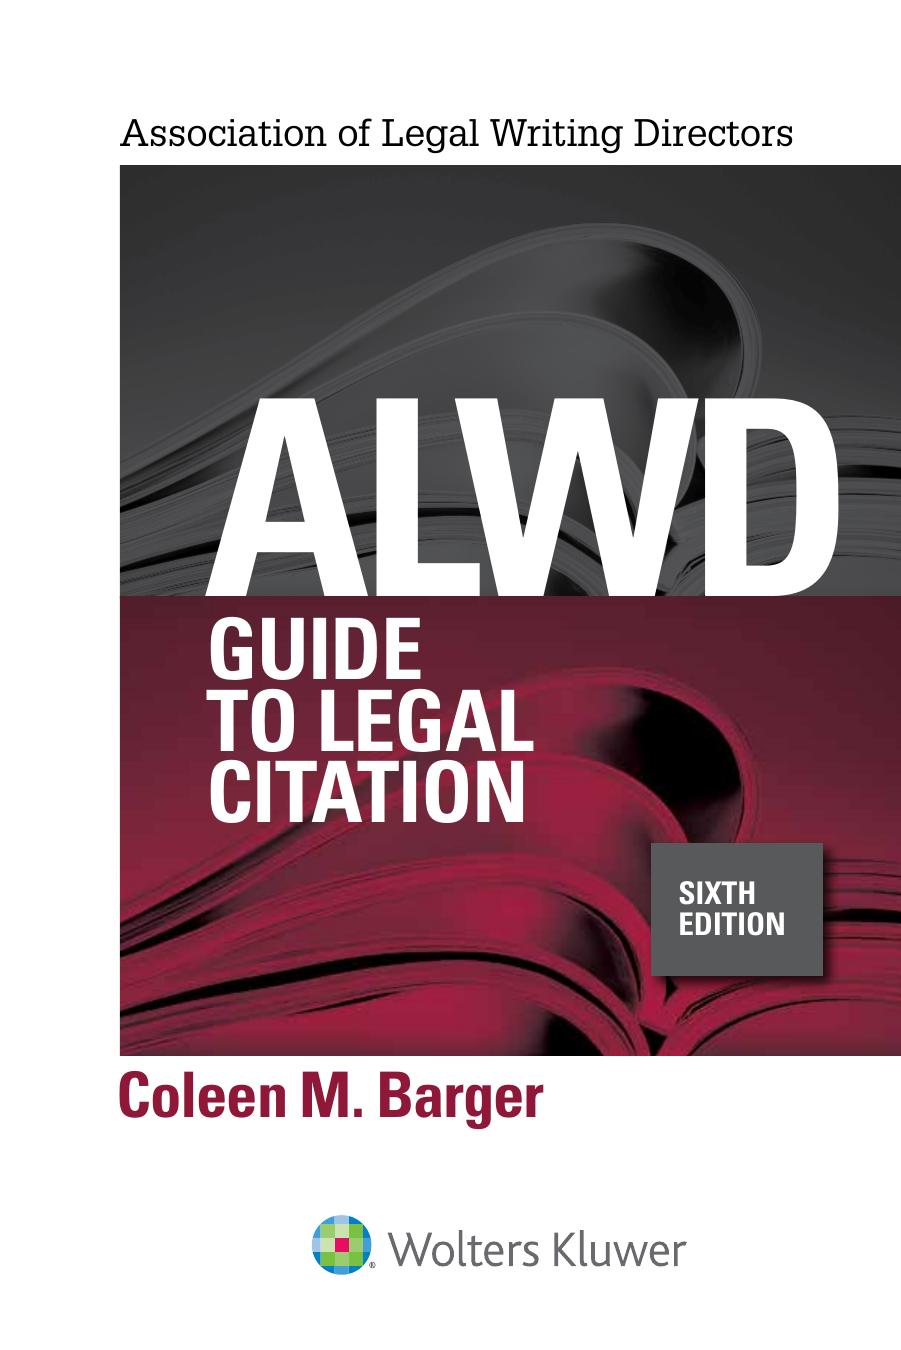 ALWD Guide to Legal Citation 6th Edition  by Coleen M. Barger